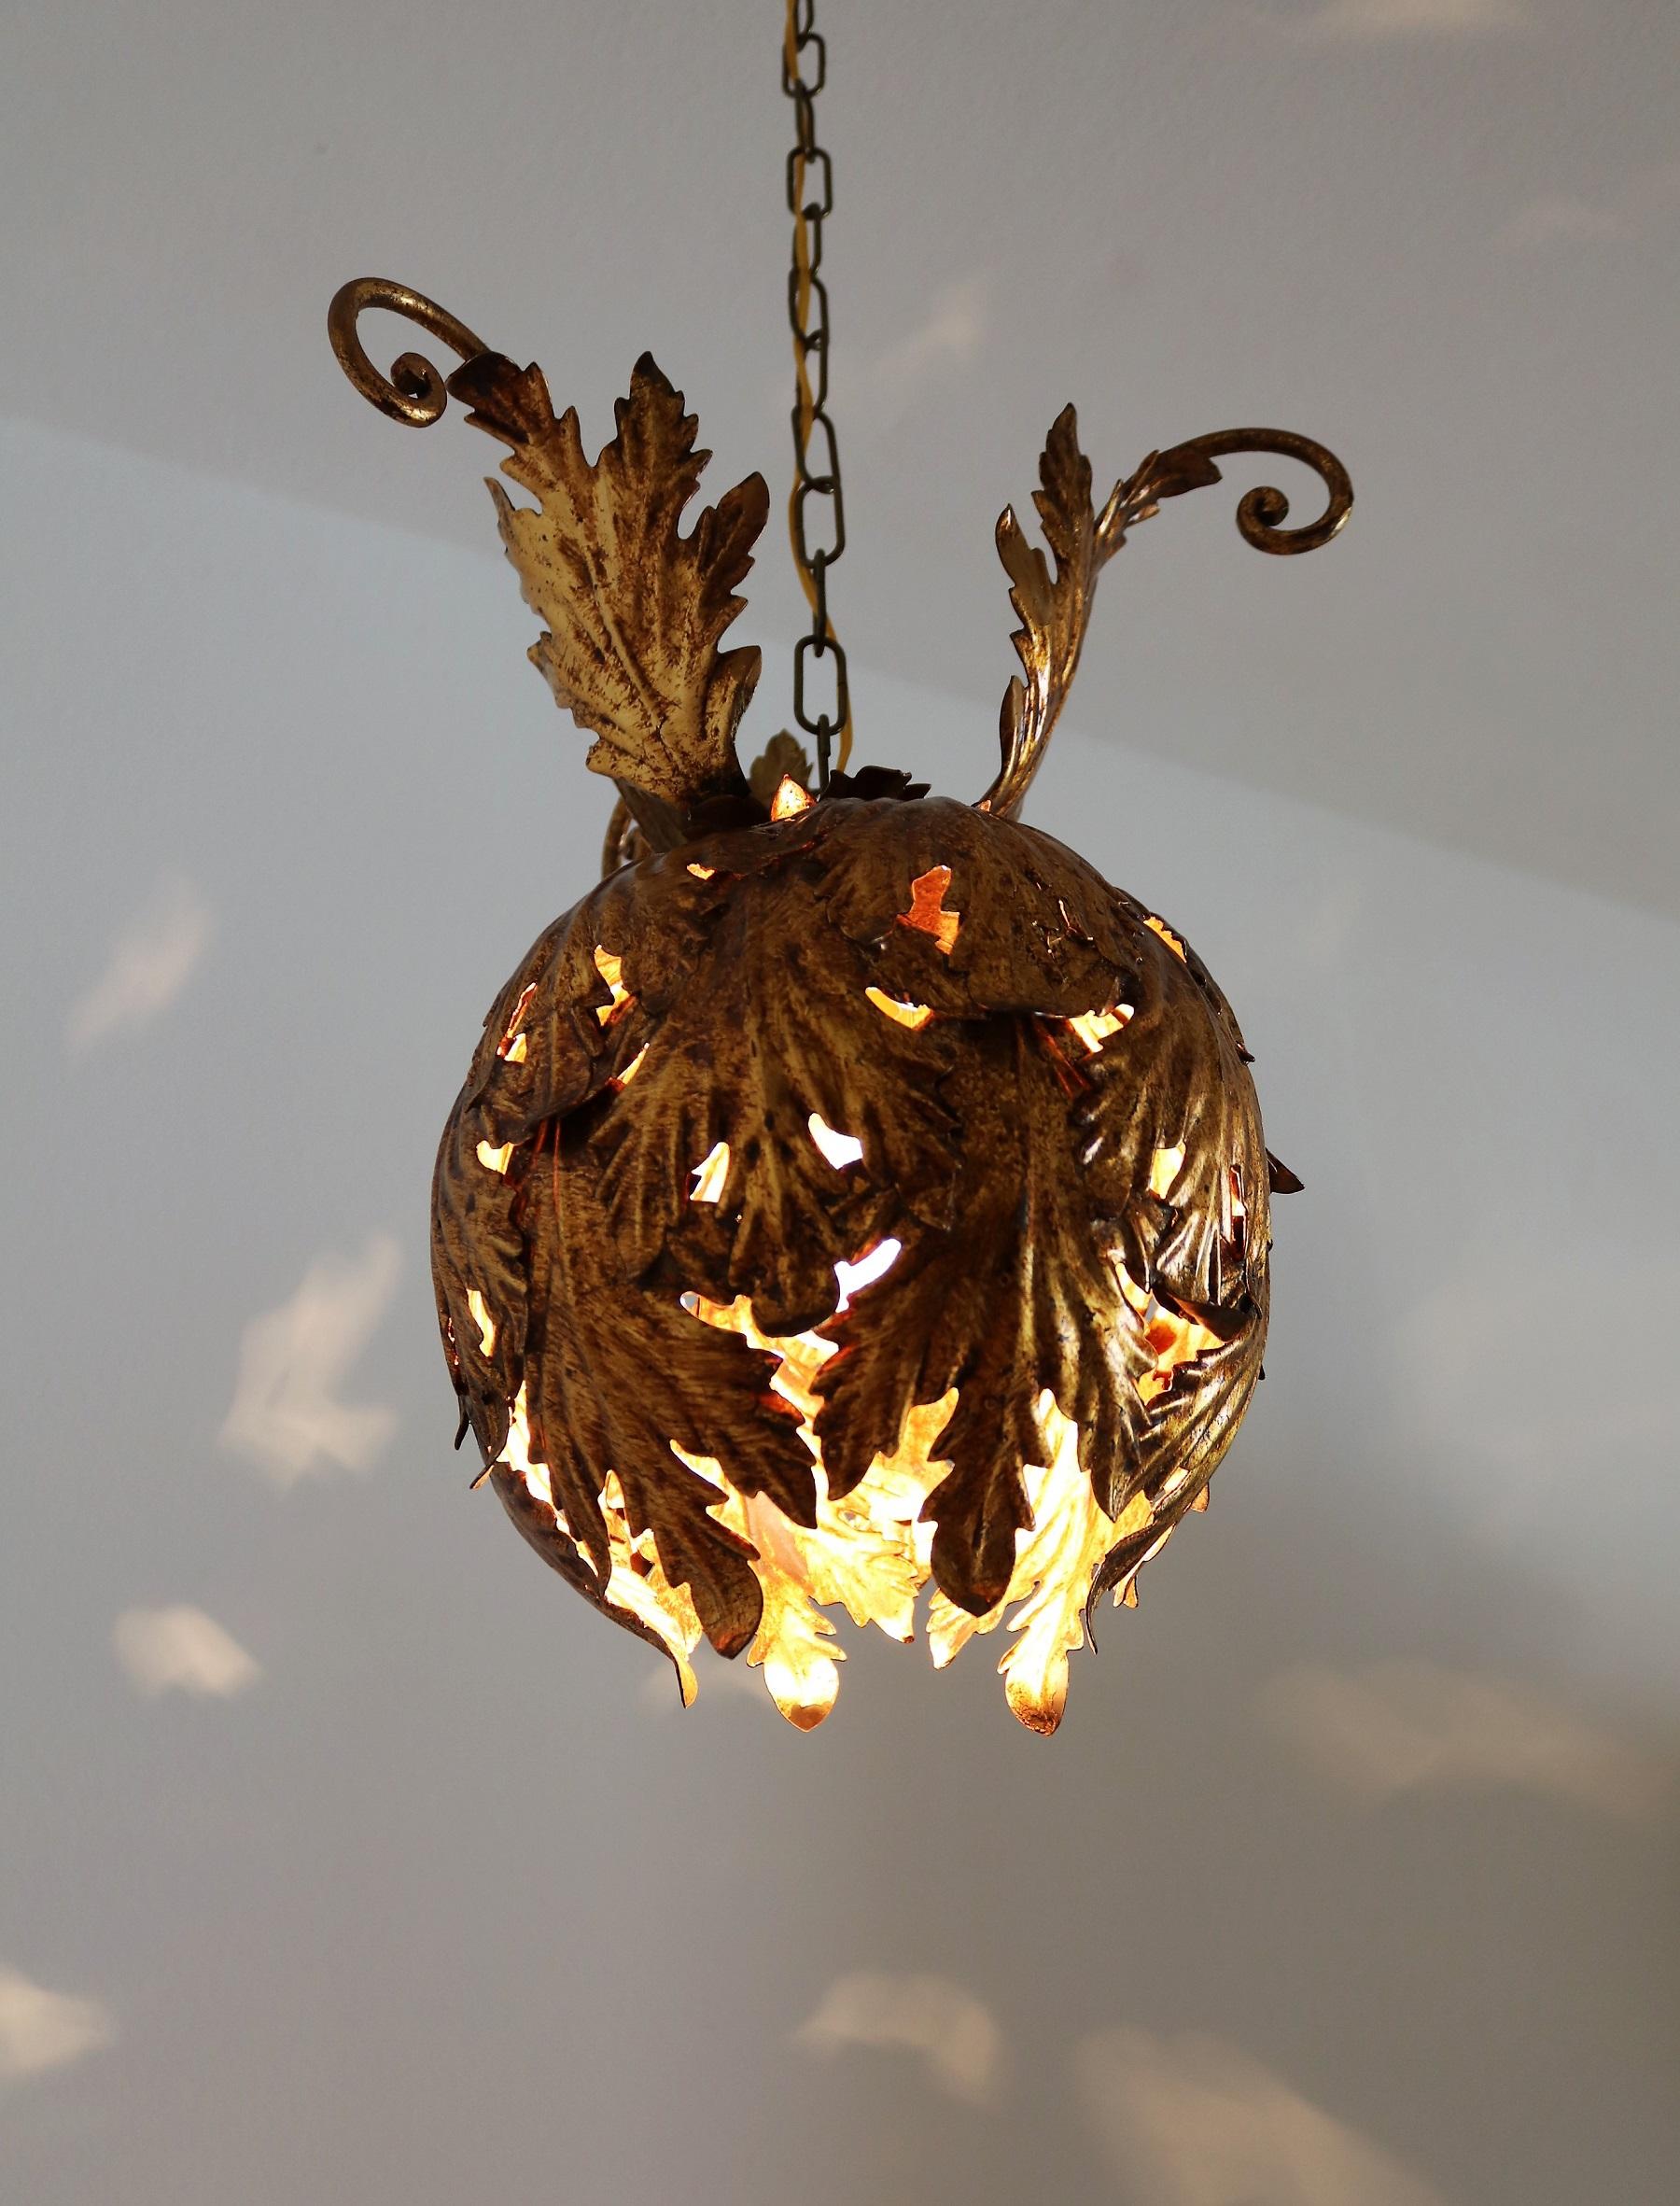 Italian Midcentury Gilt Metal Pendant Lamp with Leaves for Hans Kögl, 1960s For Sale 6